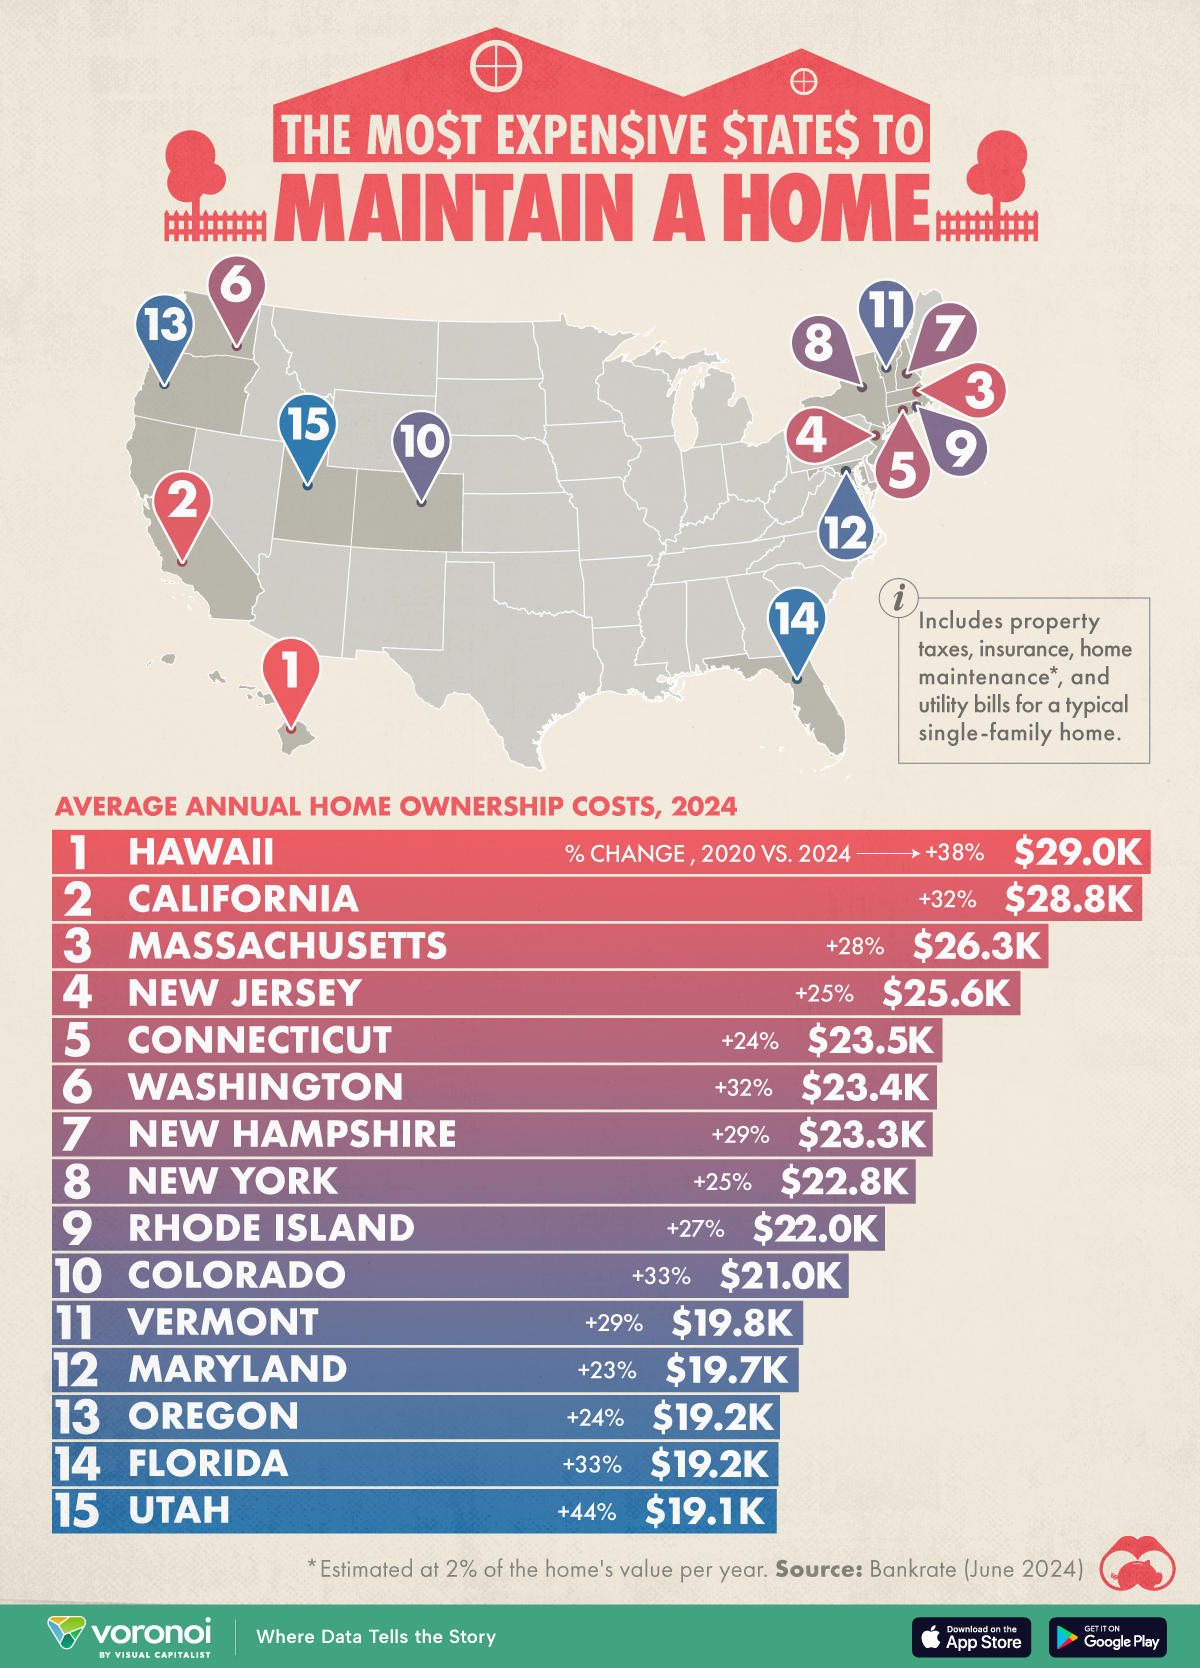 This map shows the 15 most expensive states in the U.S. to maintain a single-family home.